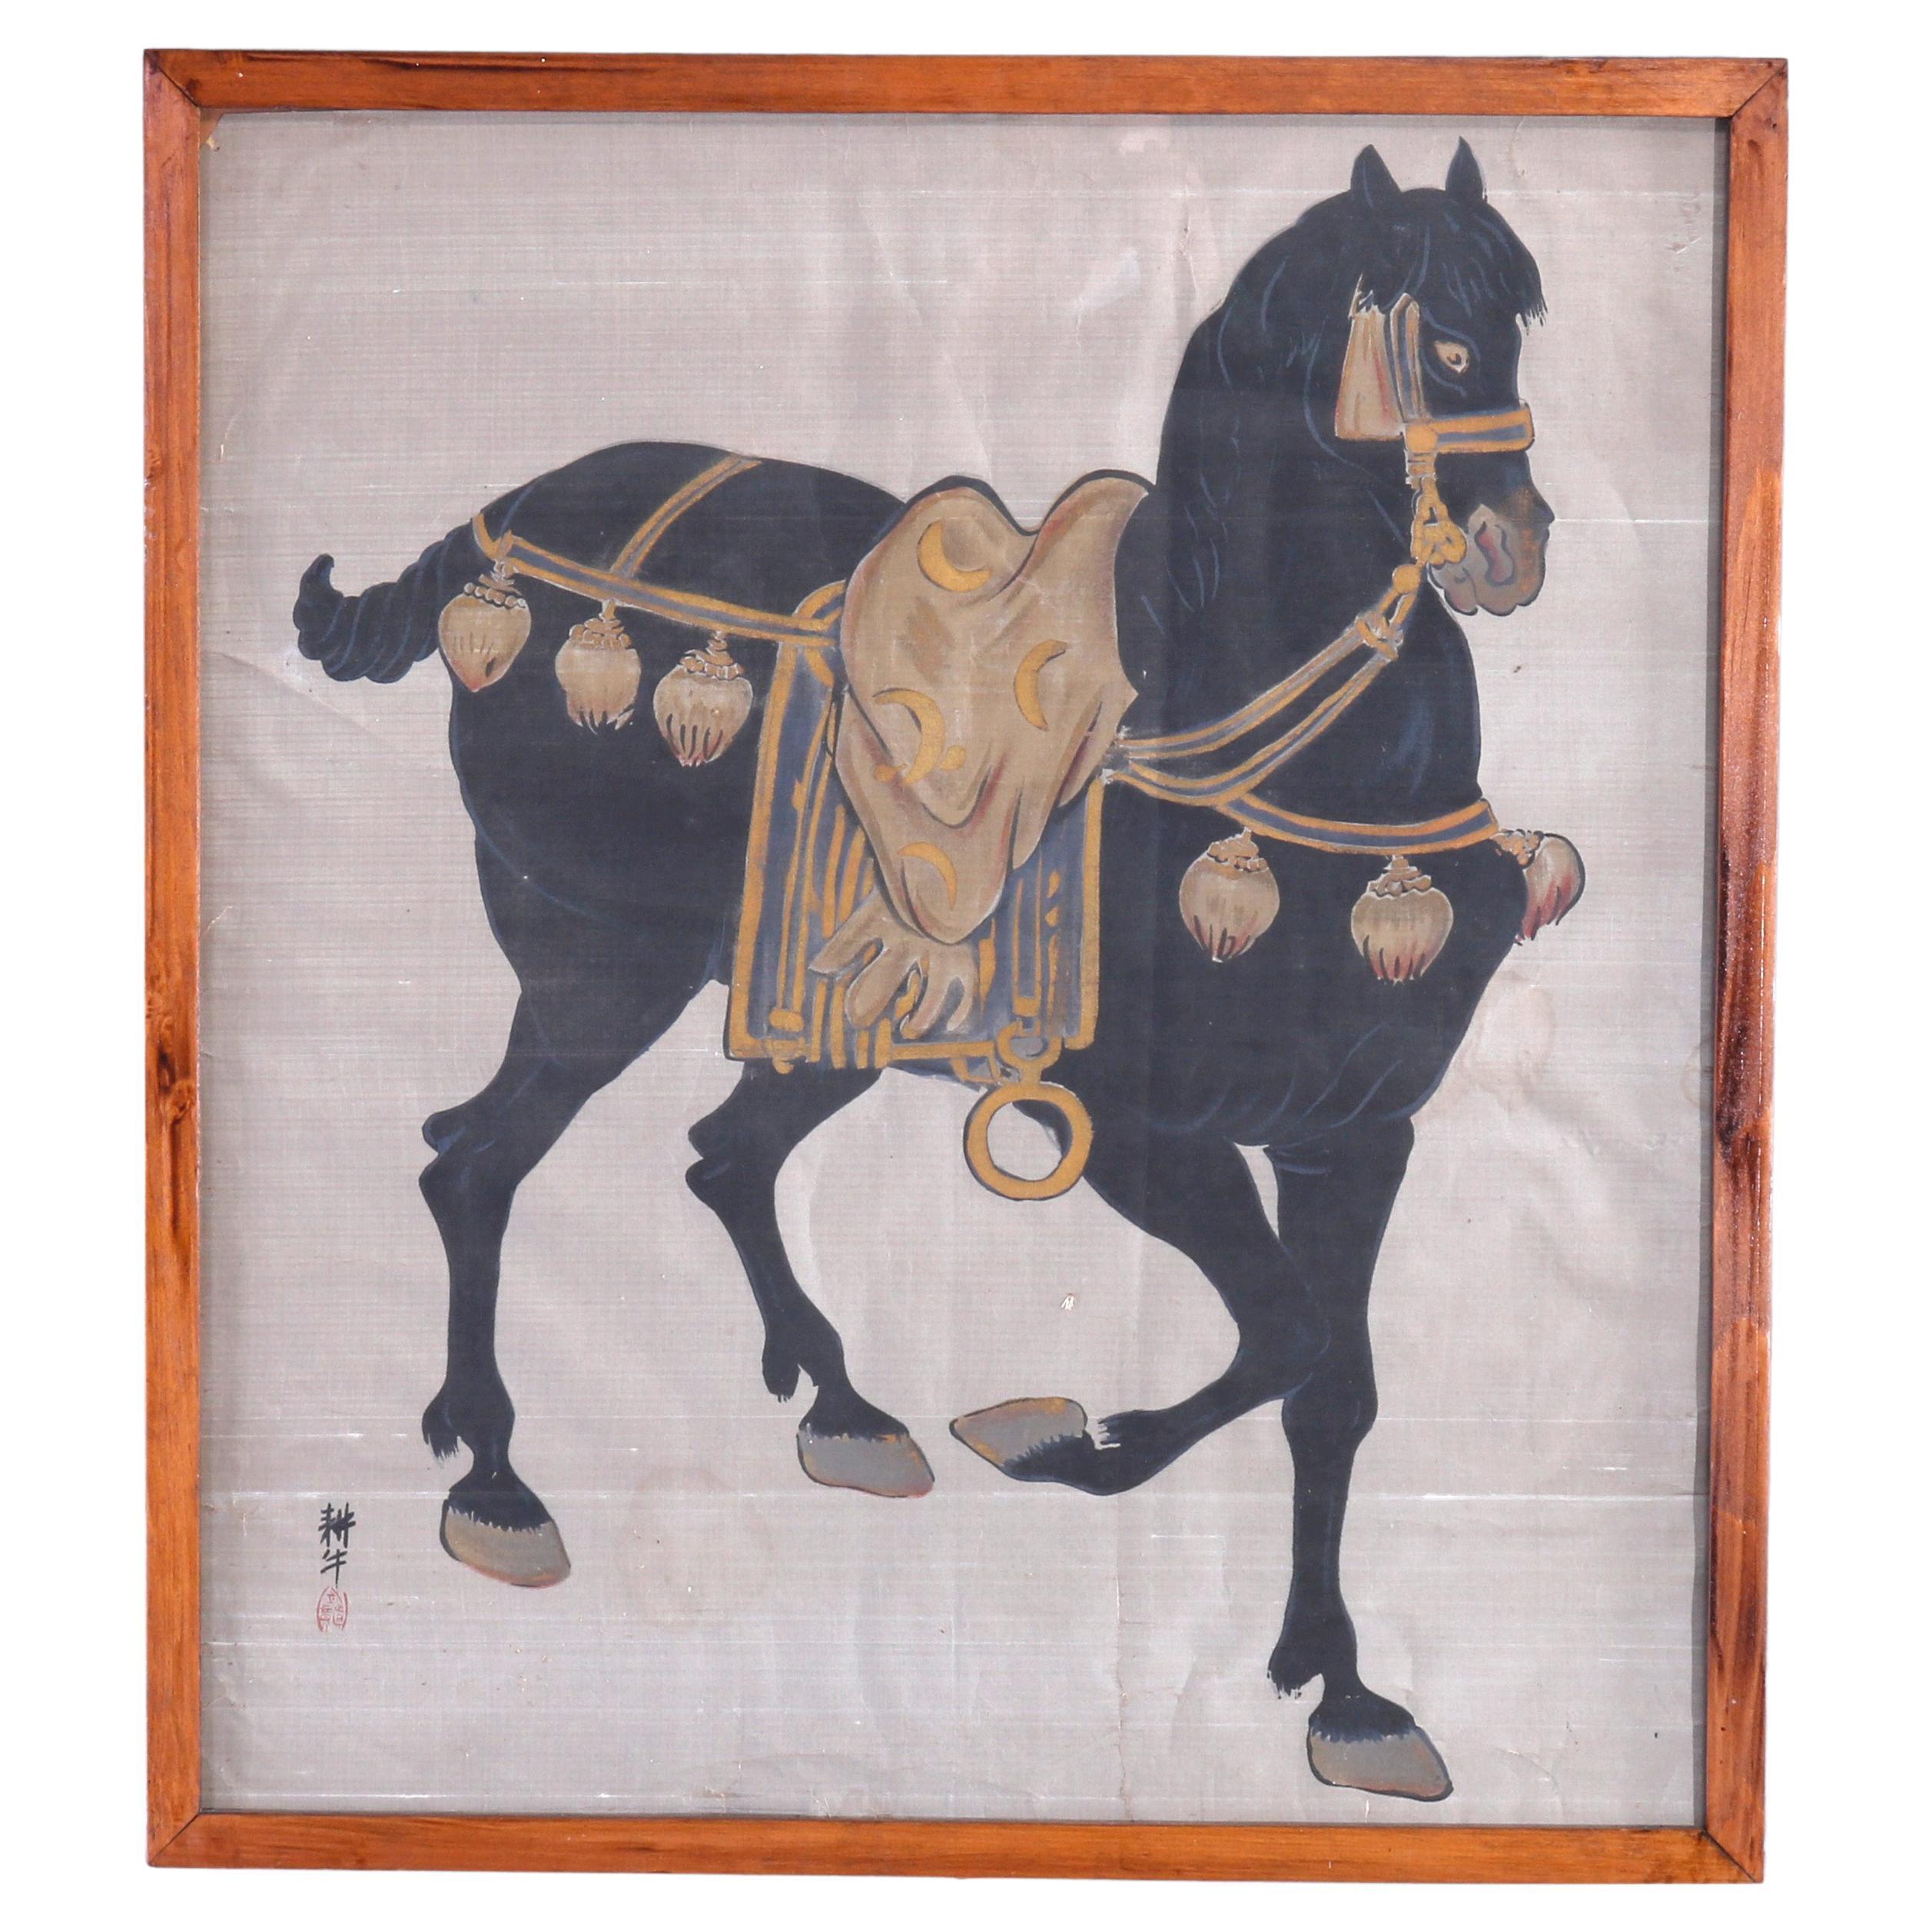 Antique Chinese Mandarin Portrait of a Horse, Watercolor on Silk, Signed, 19th C